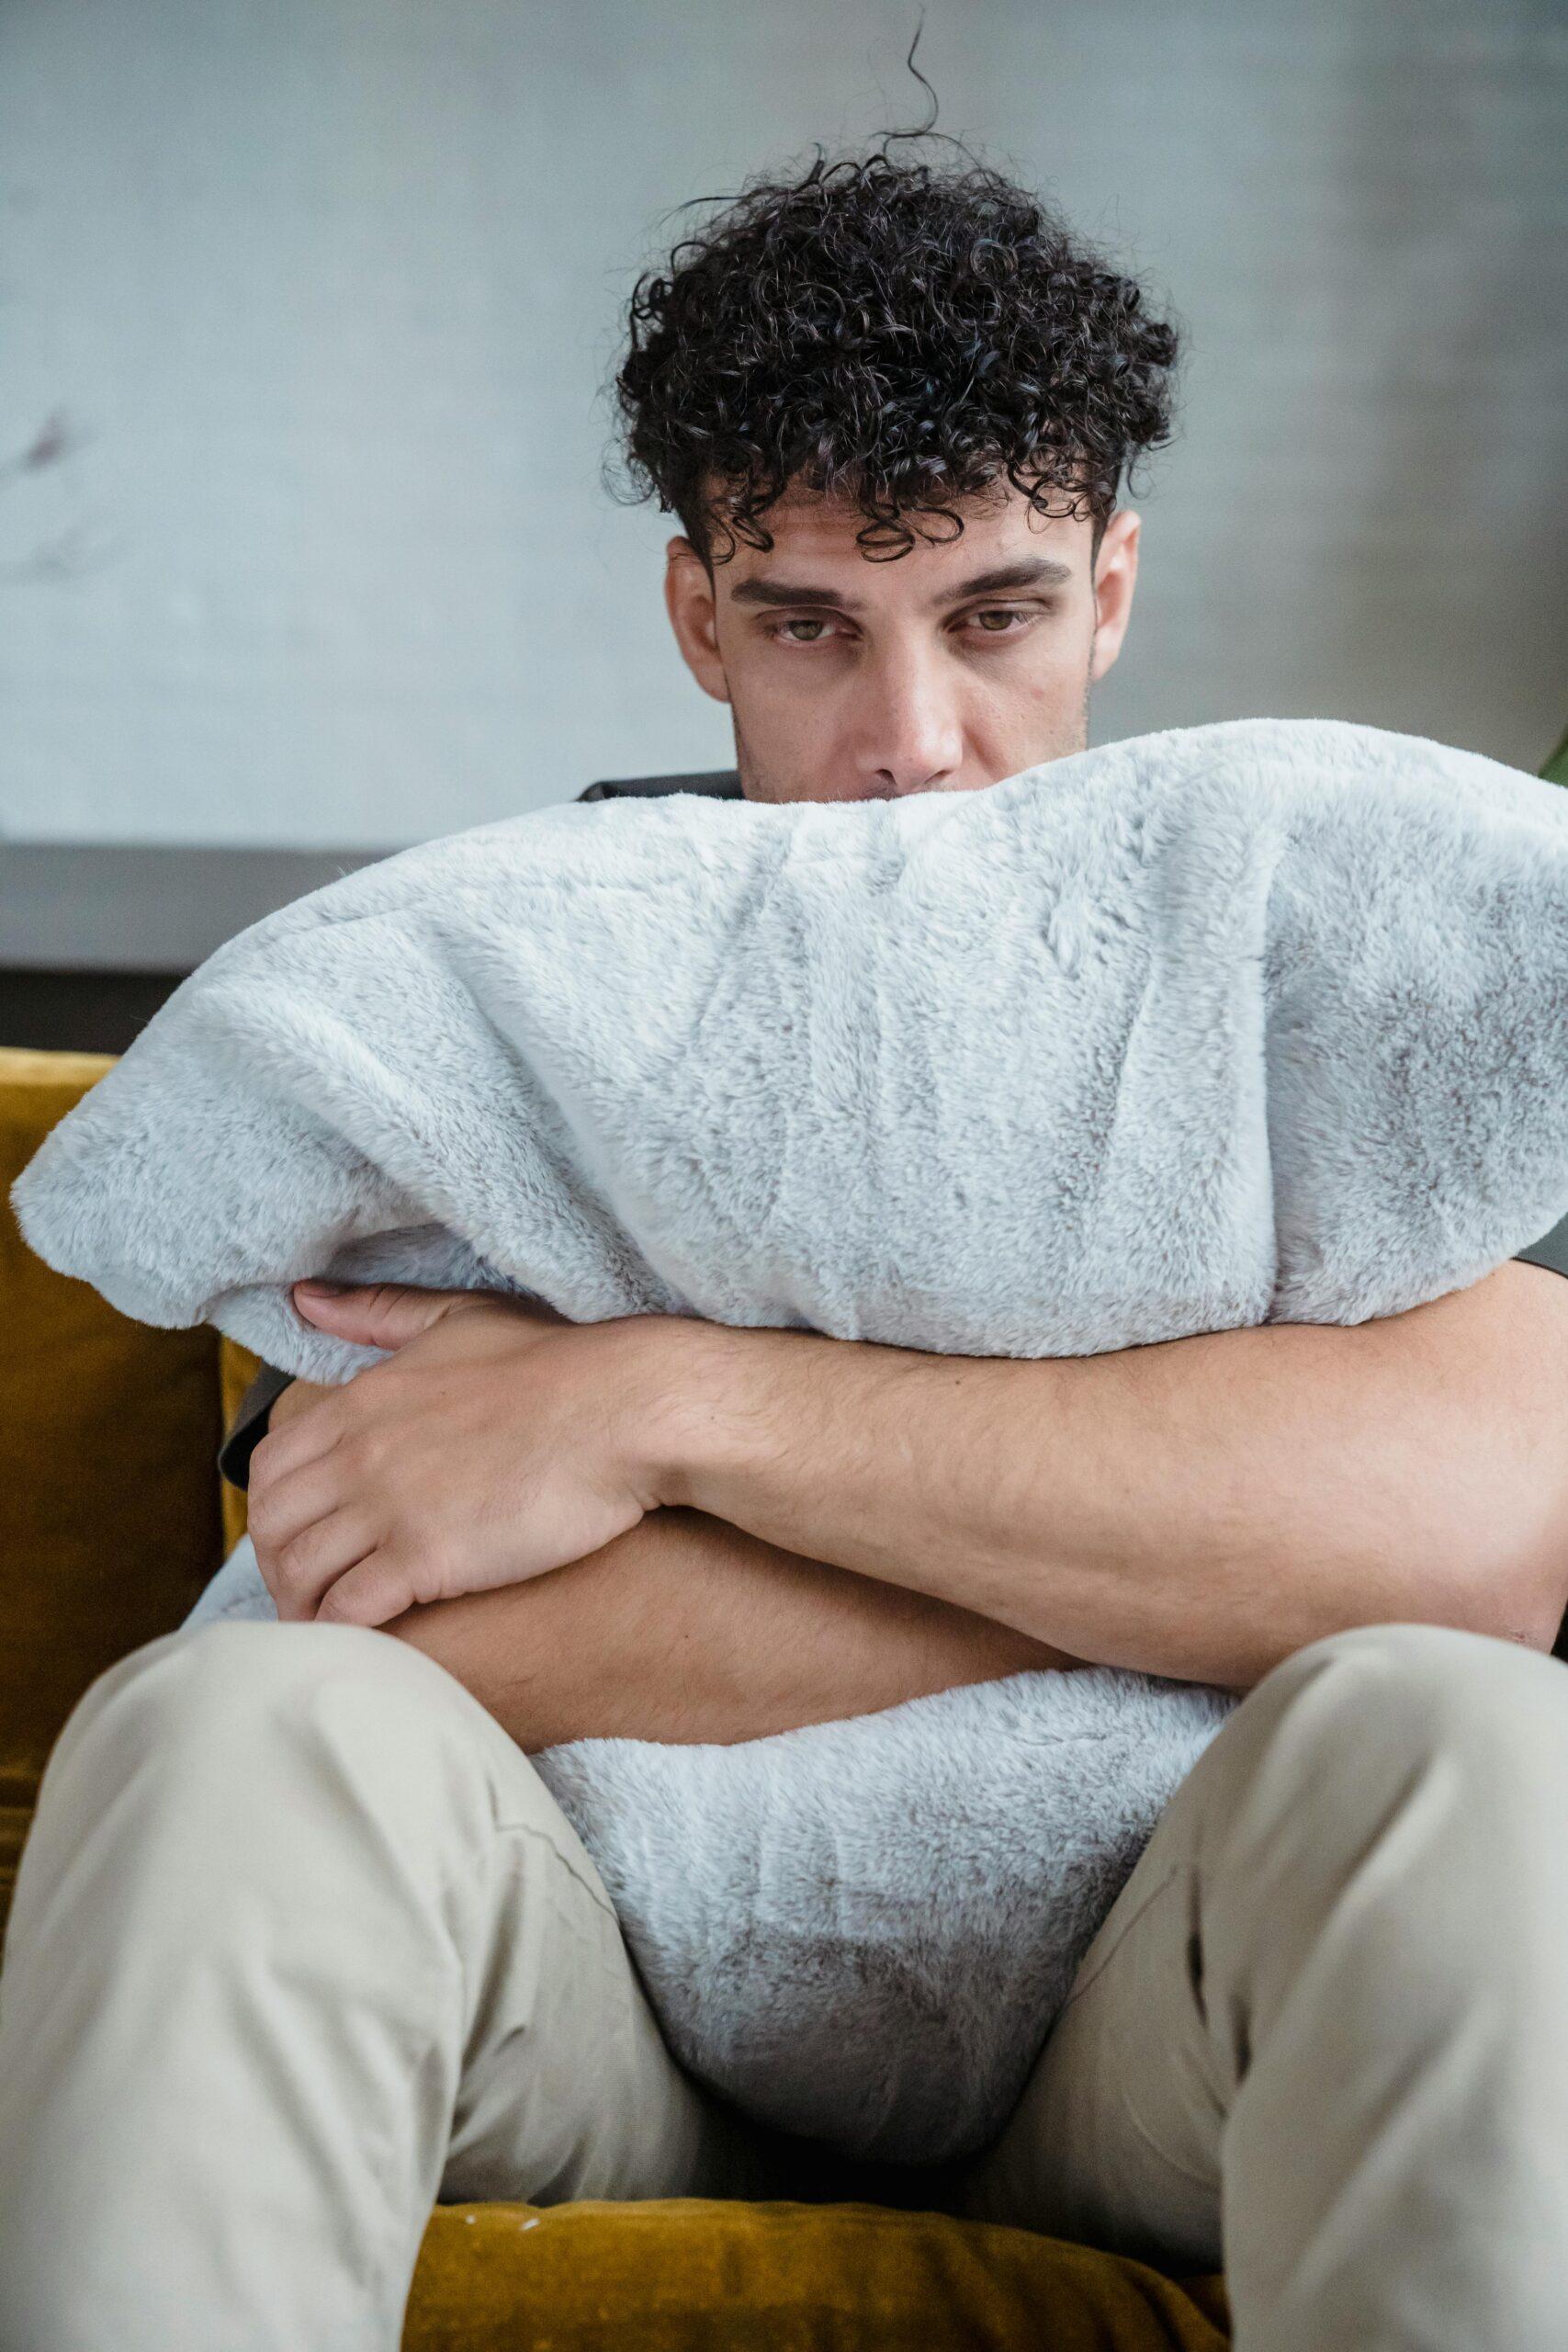 An Open Letter to My Boyfriend That will Make Him Cry